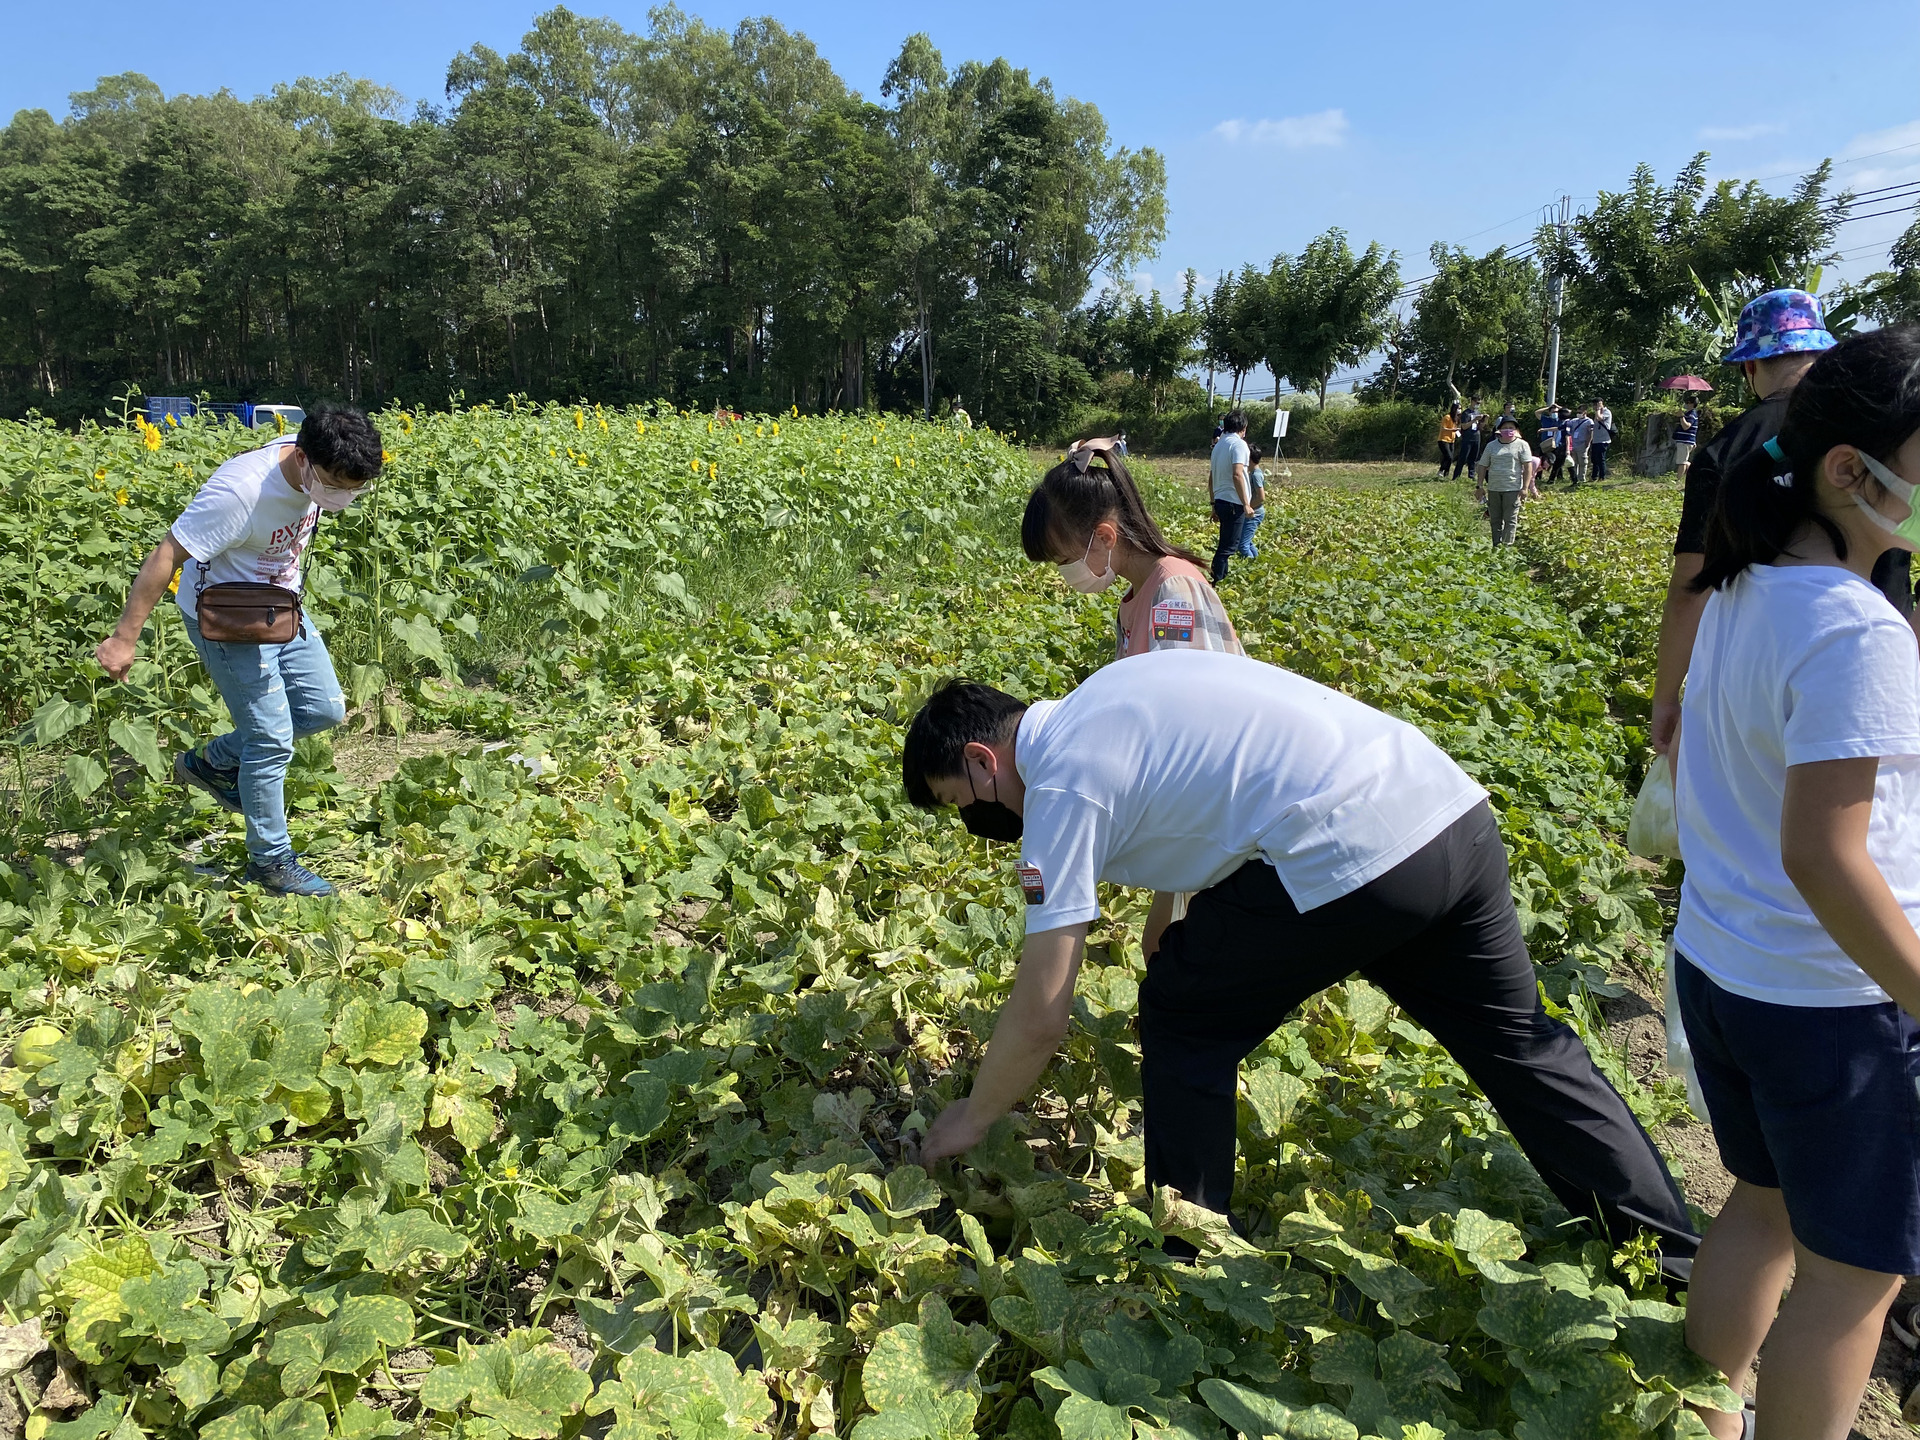 A local farmer leads the participants in harvesting melons